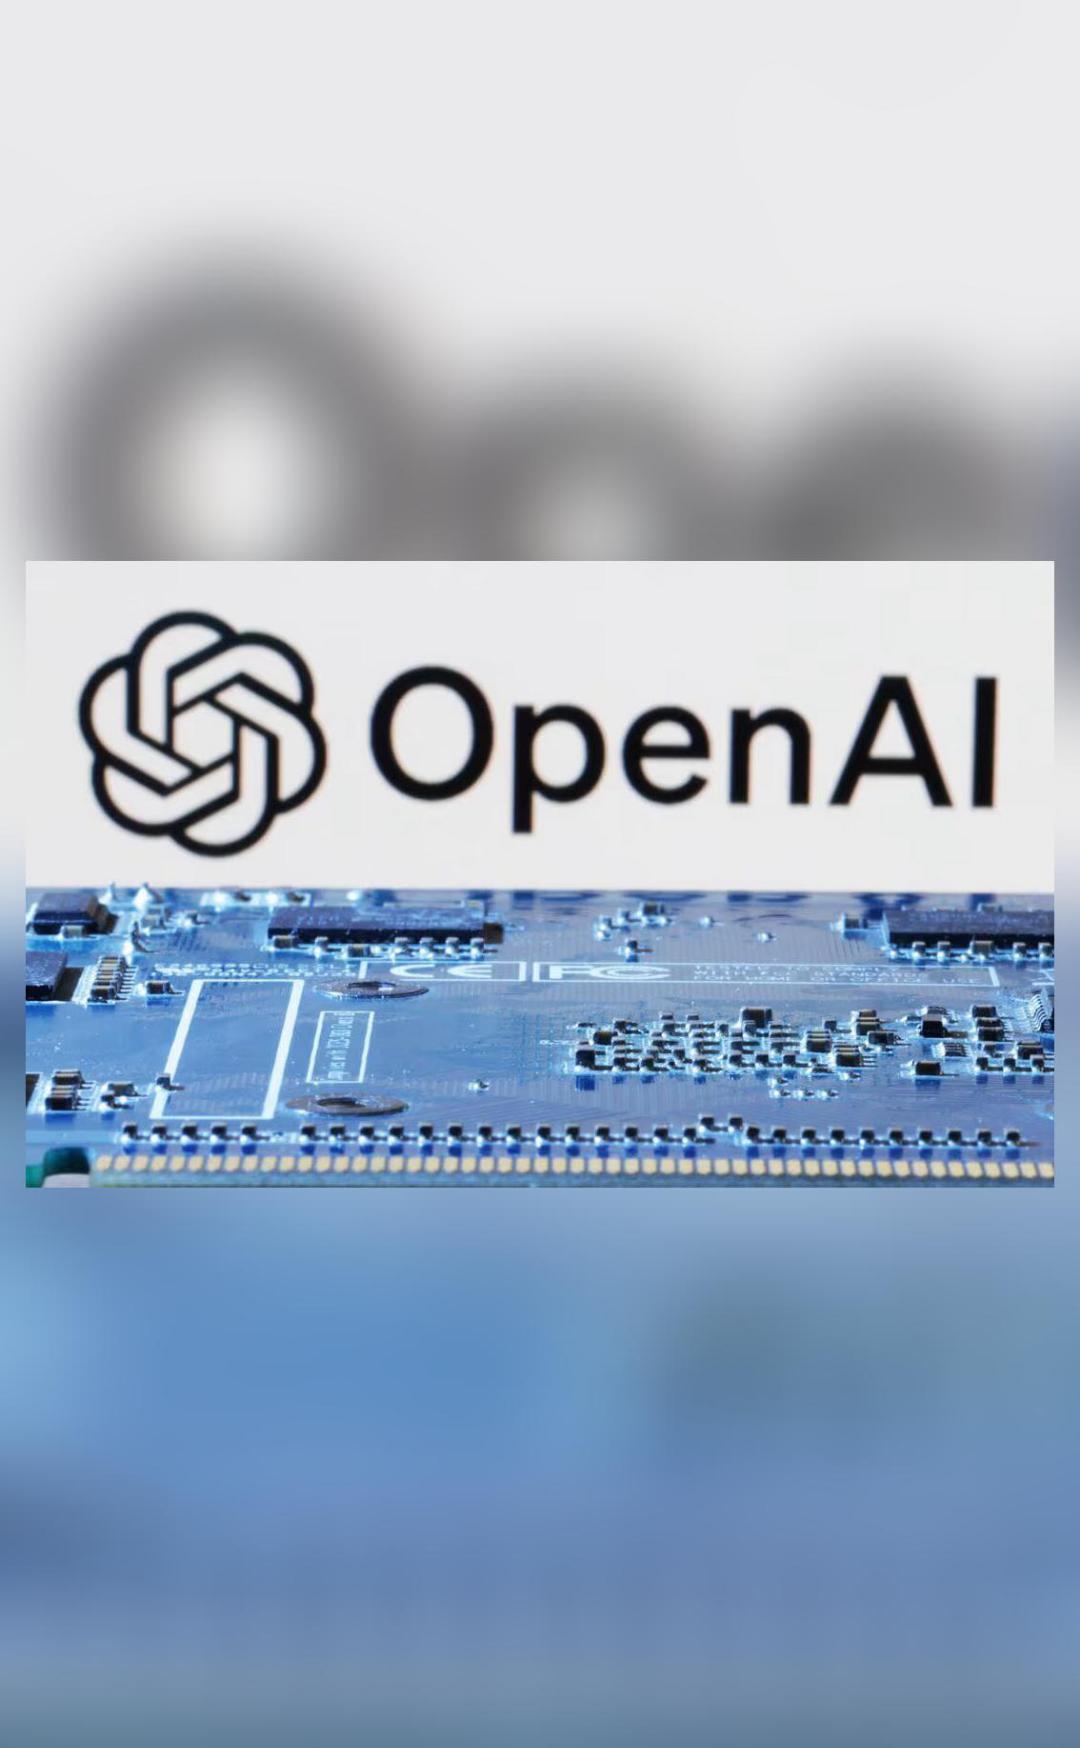 OpenAI's valuation hits $80 bn, tripling in under 10 months: NYT